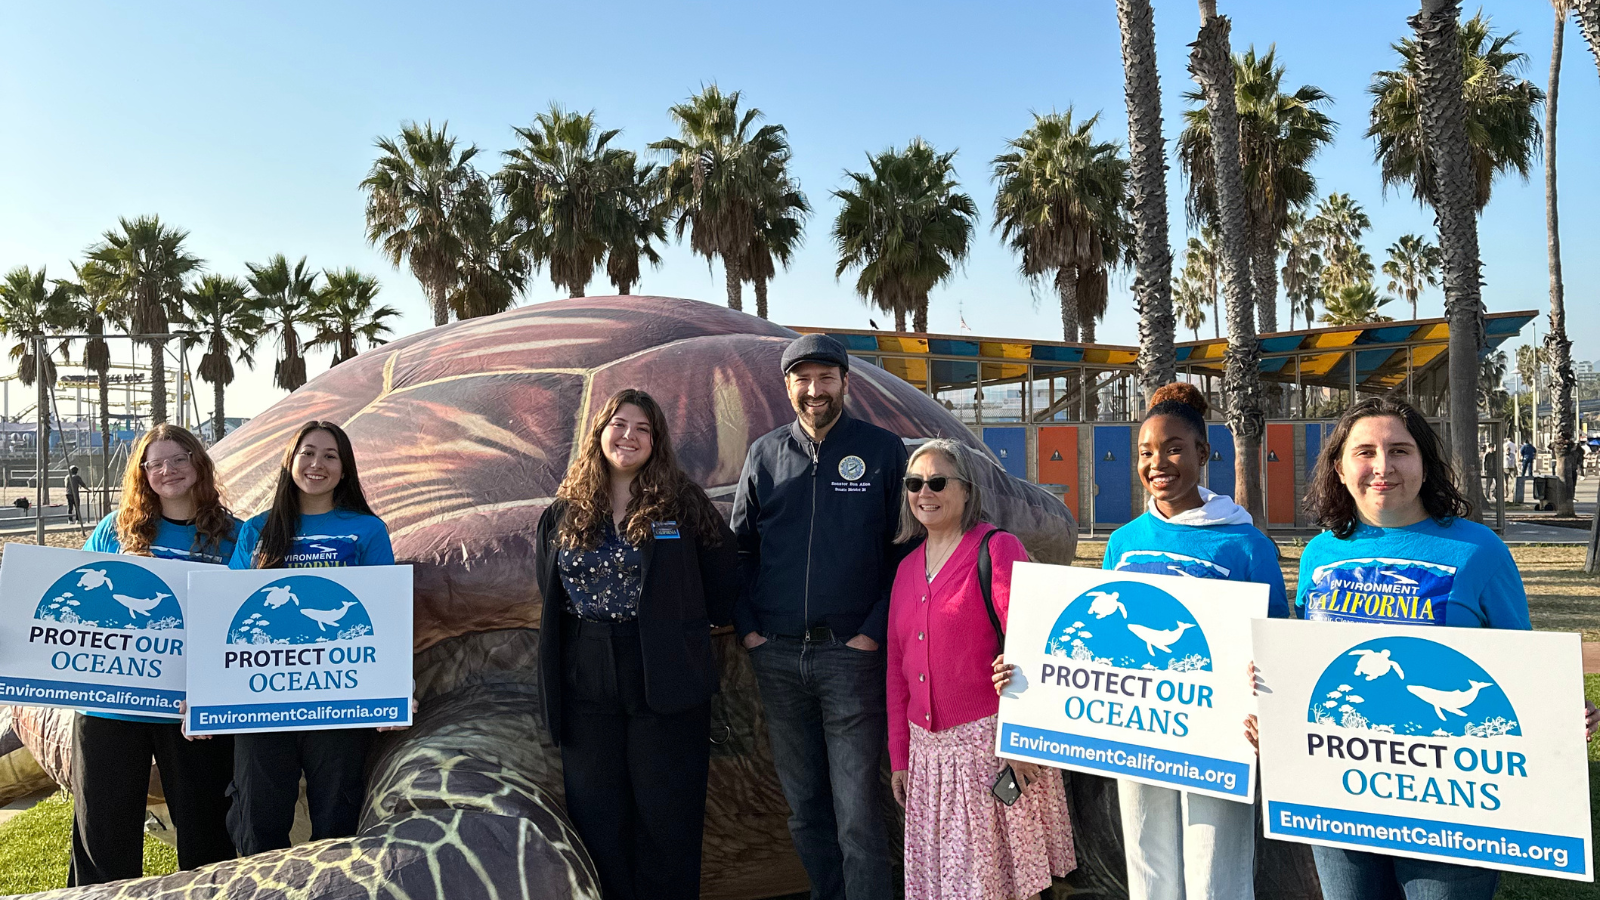 People in front of inflatable turtle with signs palm trees behind them